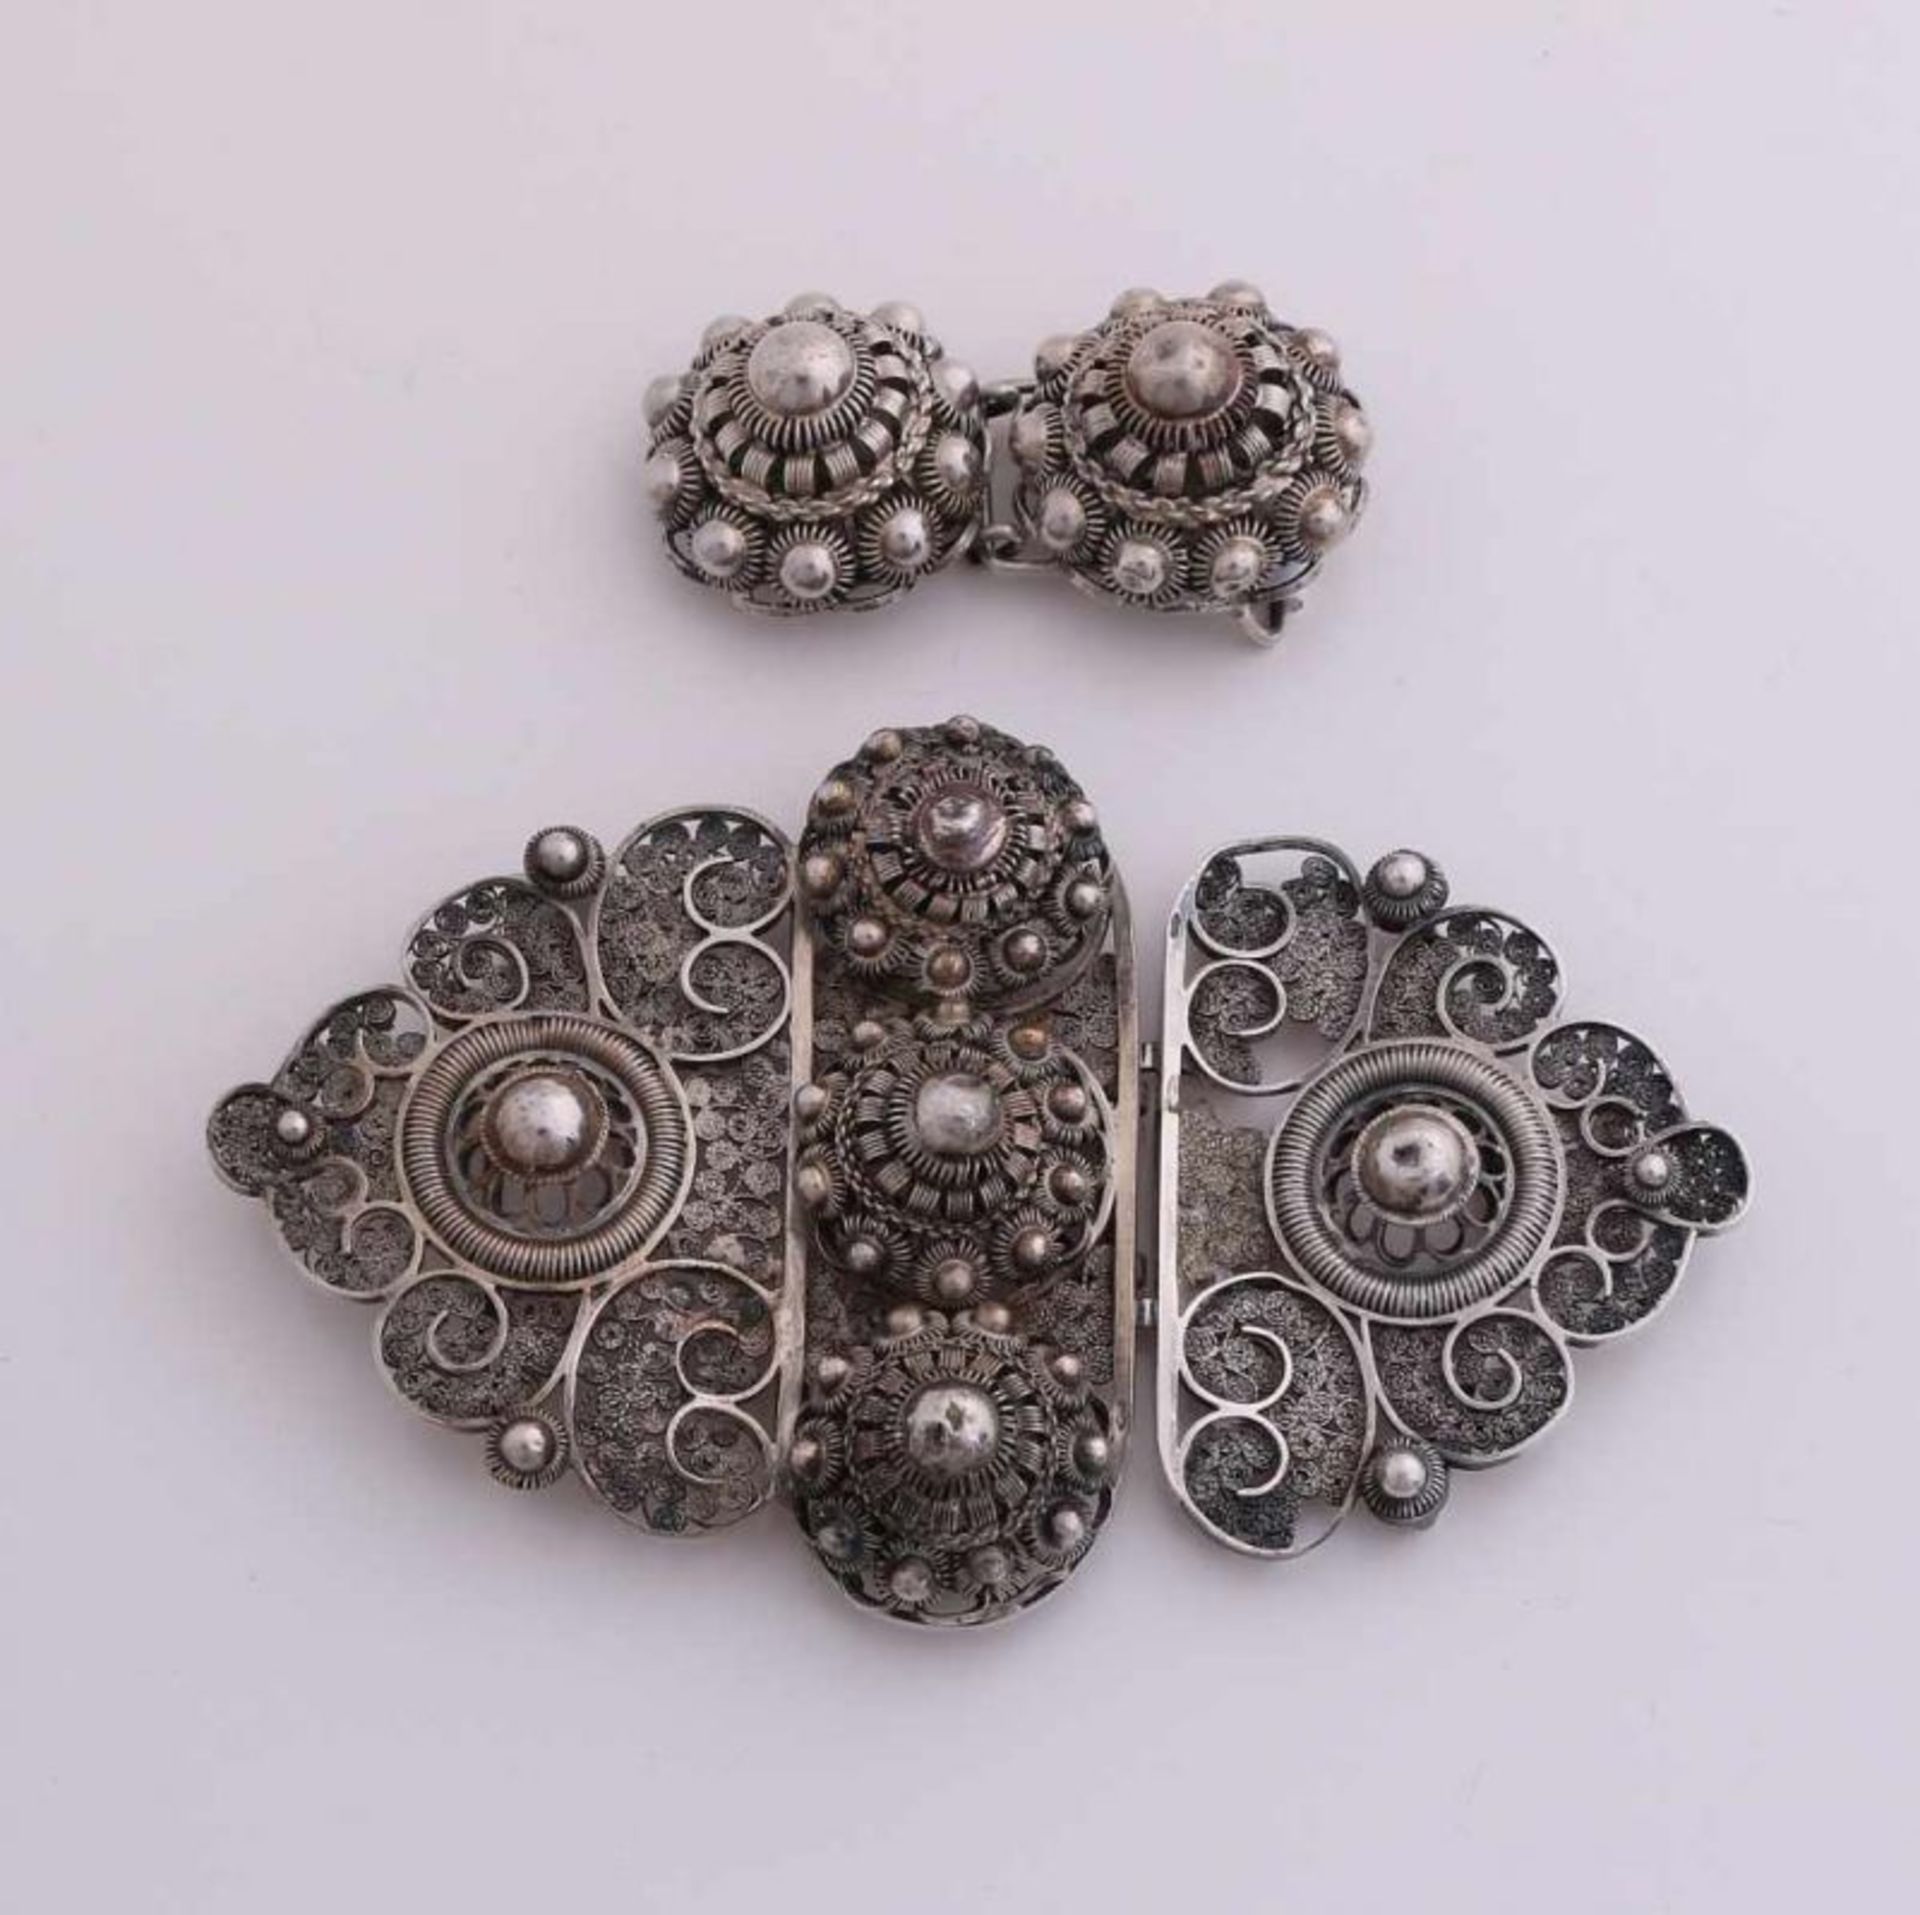 Two silver buckles, 835/000, with Zeeland buttons. Large oval molded buckle with filigree and